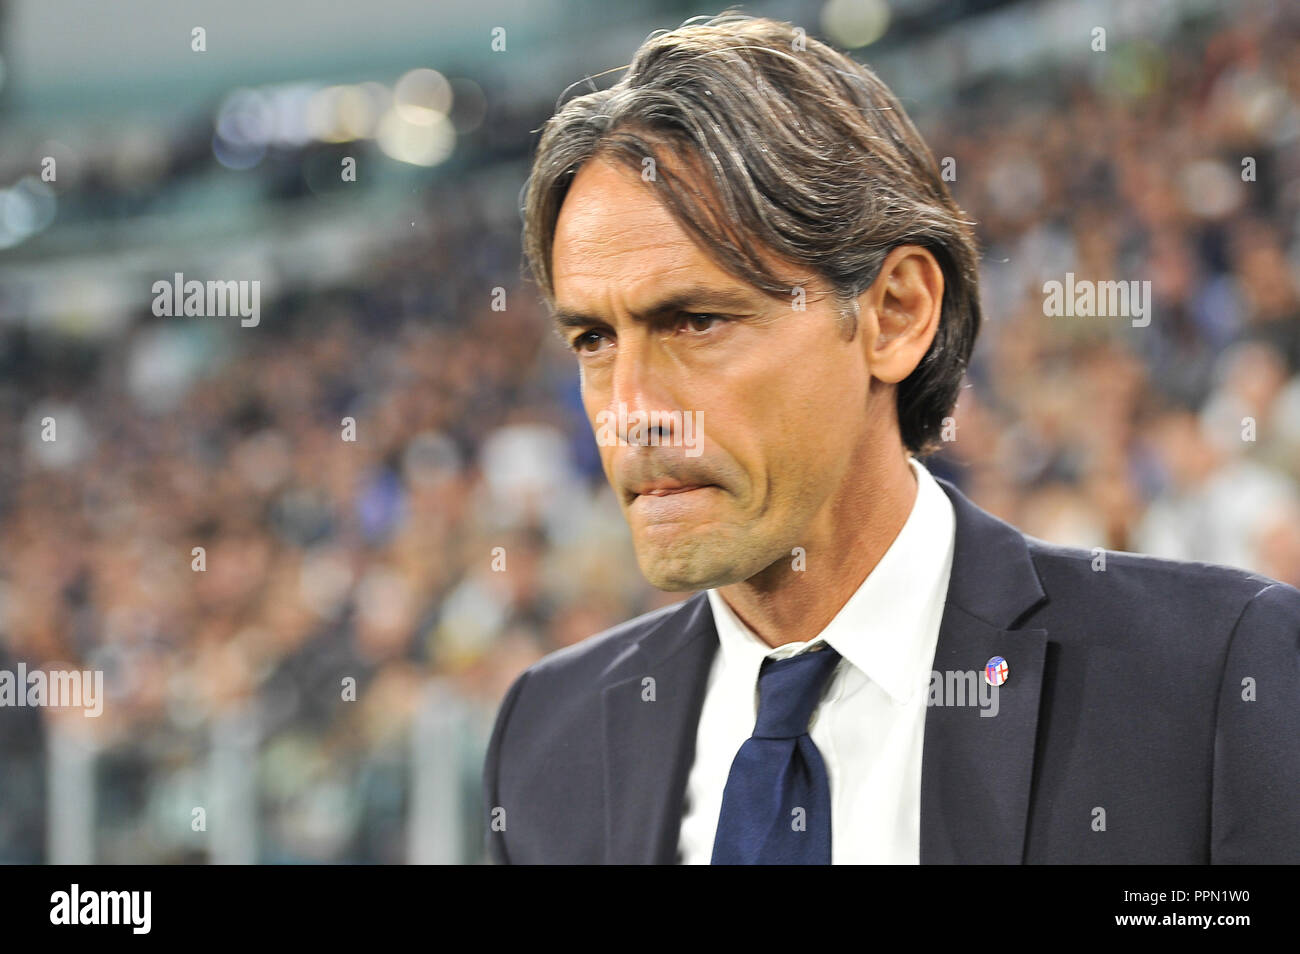 Turin, Italy. 26th September, 2018. Filippo Inzaghi, head coach Bologna FC during the Serie A football match between Juventus FC and Bologna FC at Allianz Stadium on 26th September, 2018 in Turin, Italy. Credit: FABIO PETROSINO/Alamy Live News Stock Photo